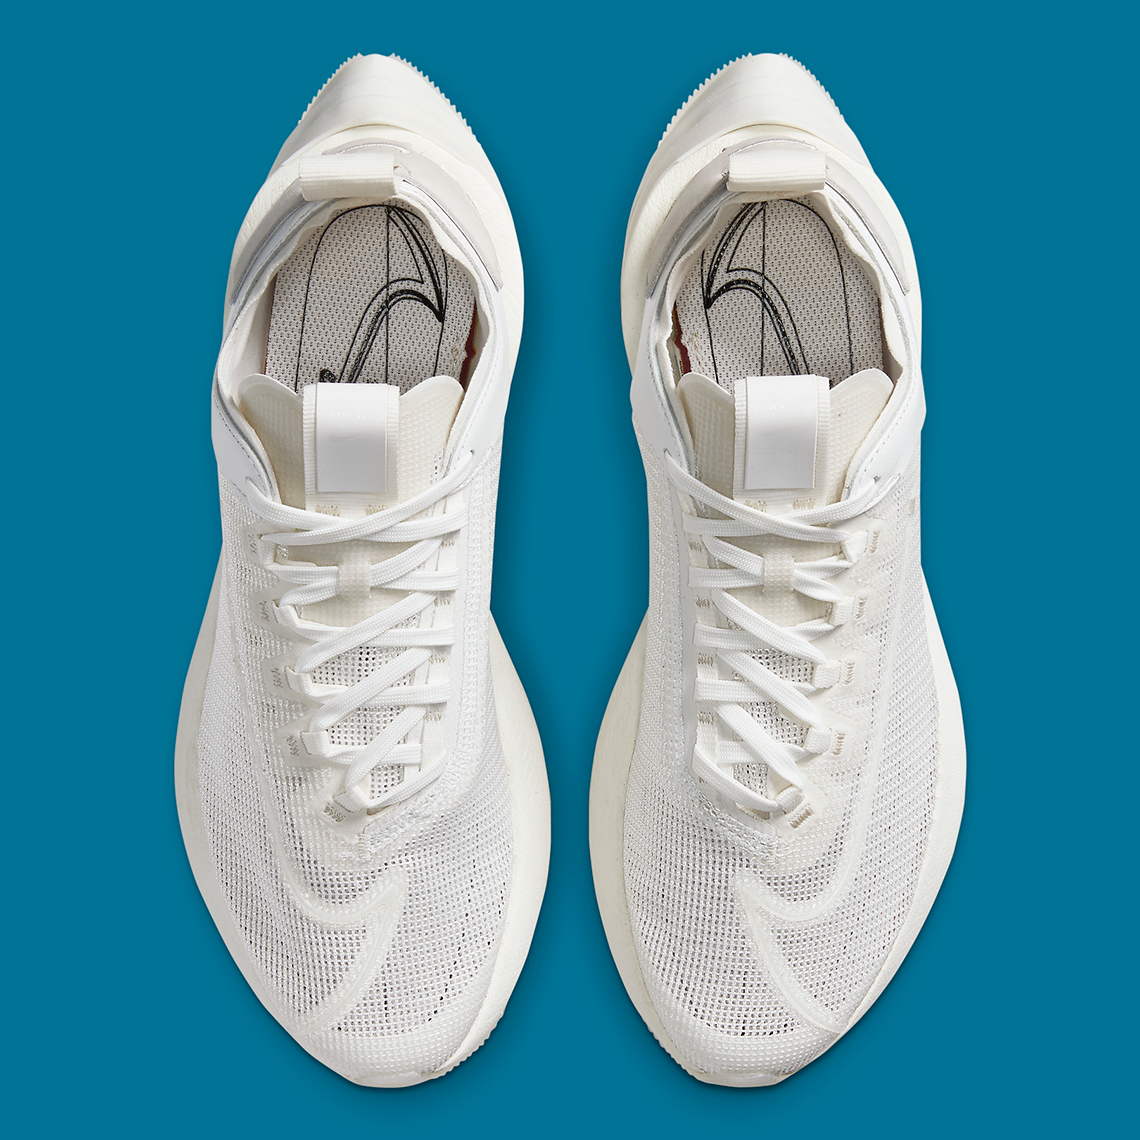 Nike Zoom Double Stacked White CI0804-100 Release Info | SneakerNews.com